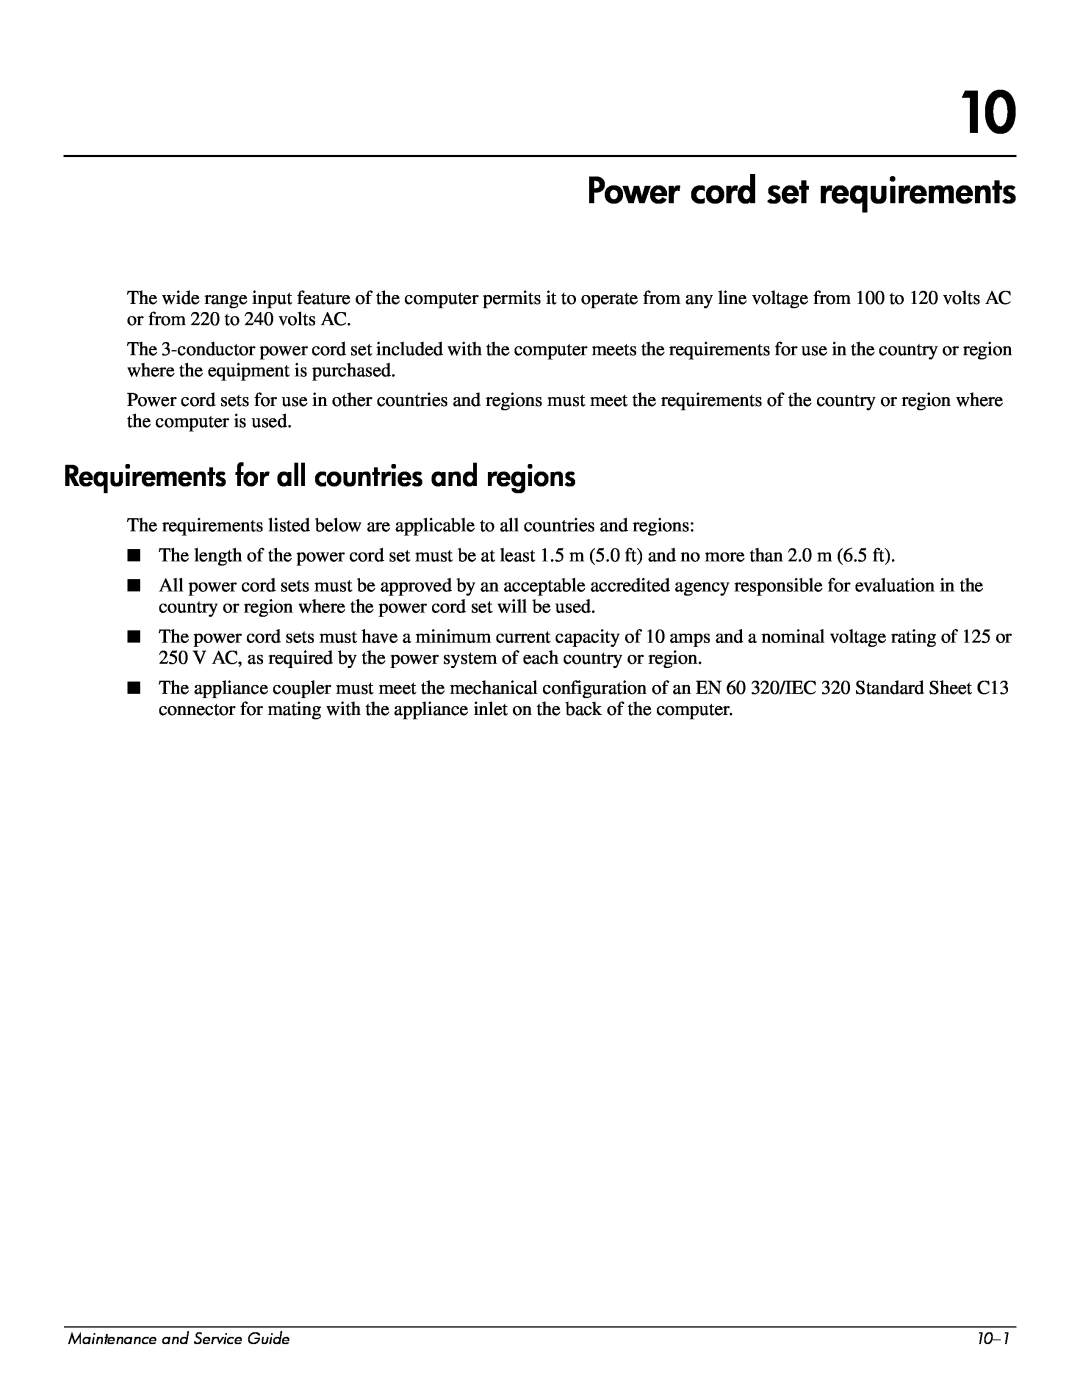 Compaq 511, 510, 515 manual Power cord set requirements, Requirements for all countries and regions 